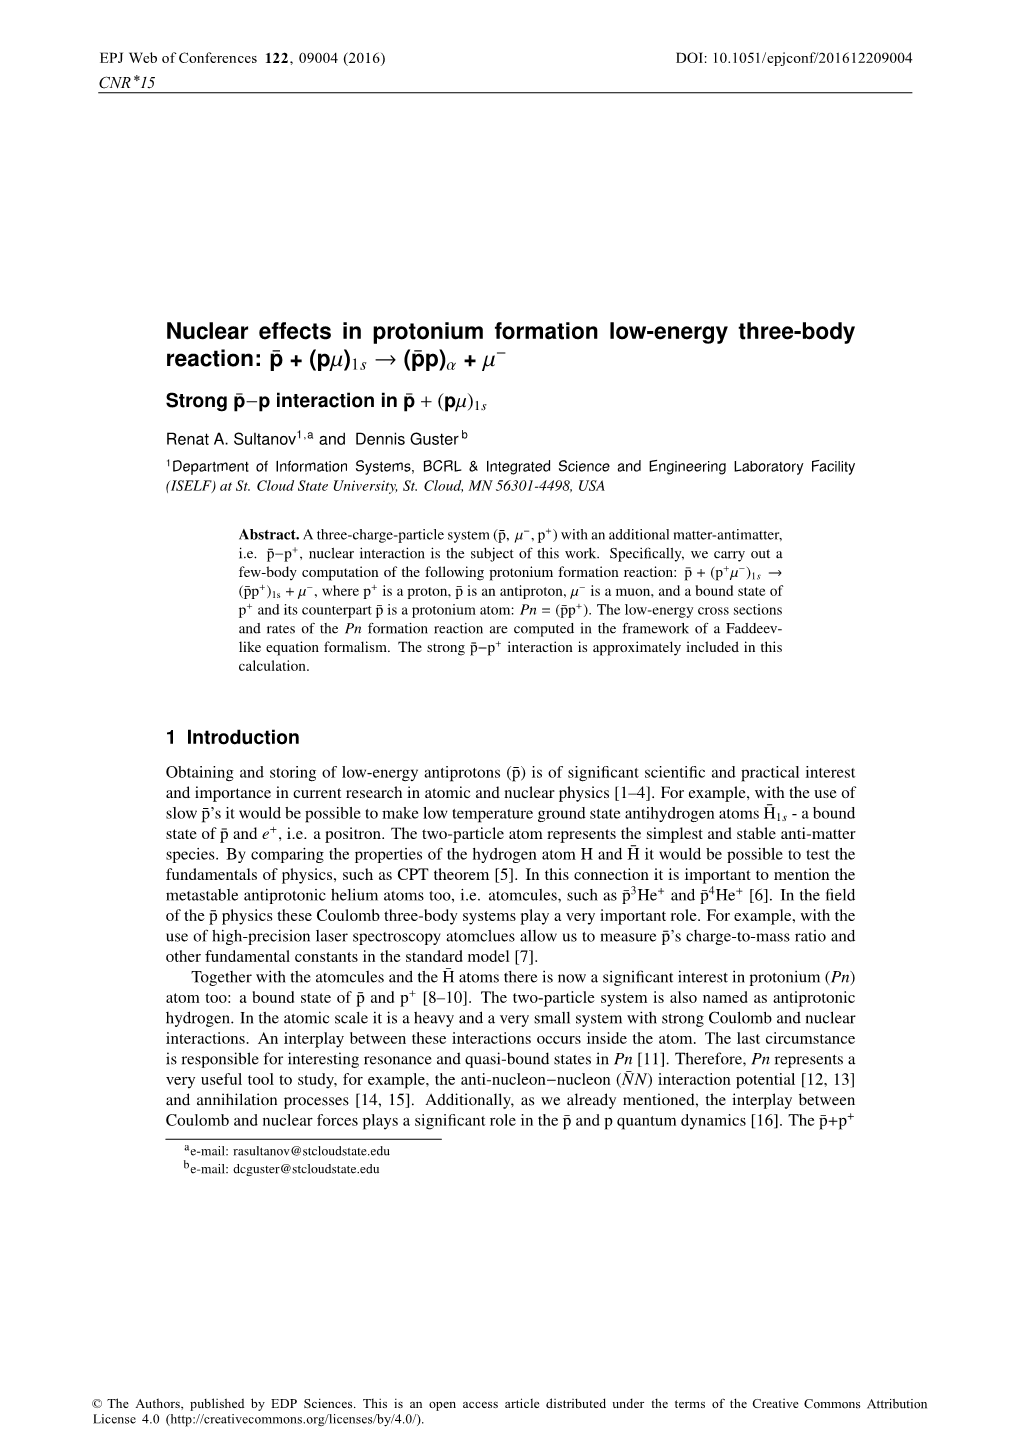 Nuclear Effects in Protonium Formation Low-Energy Three-Body Reaction